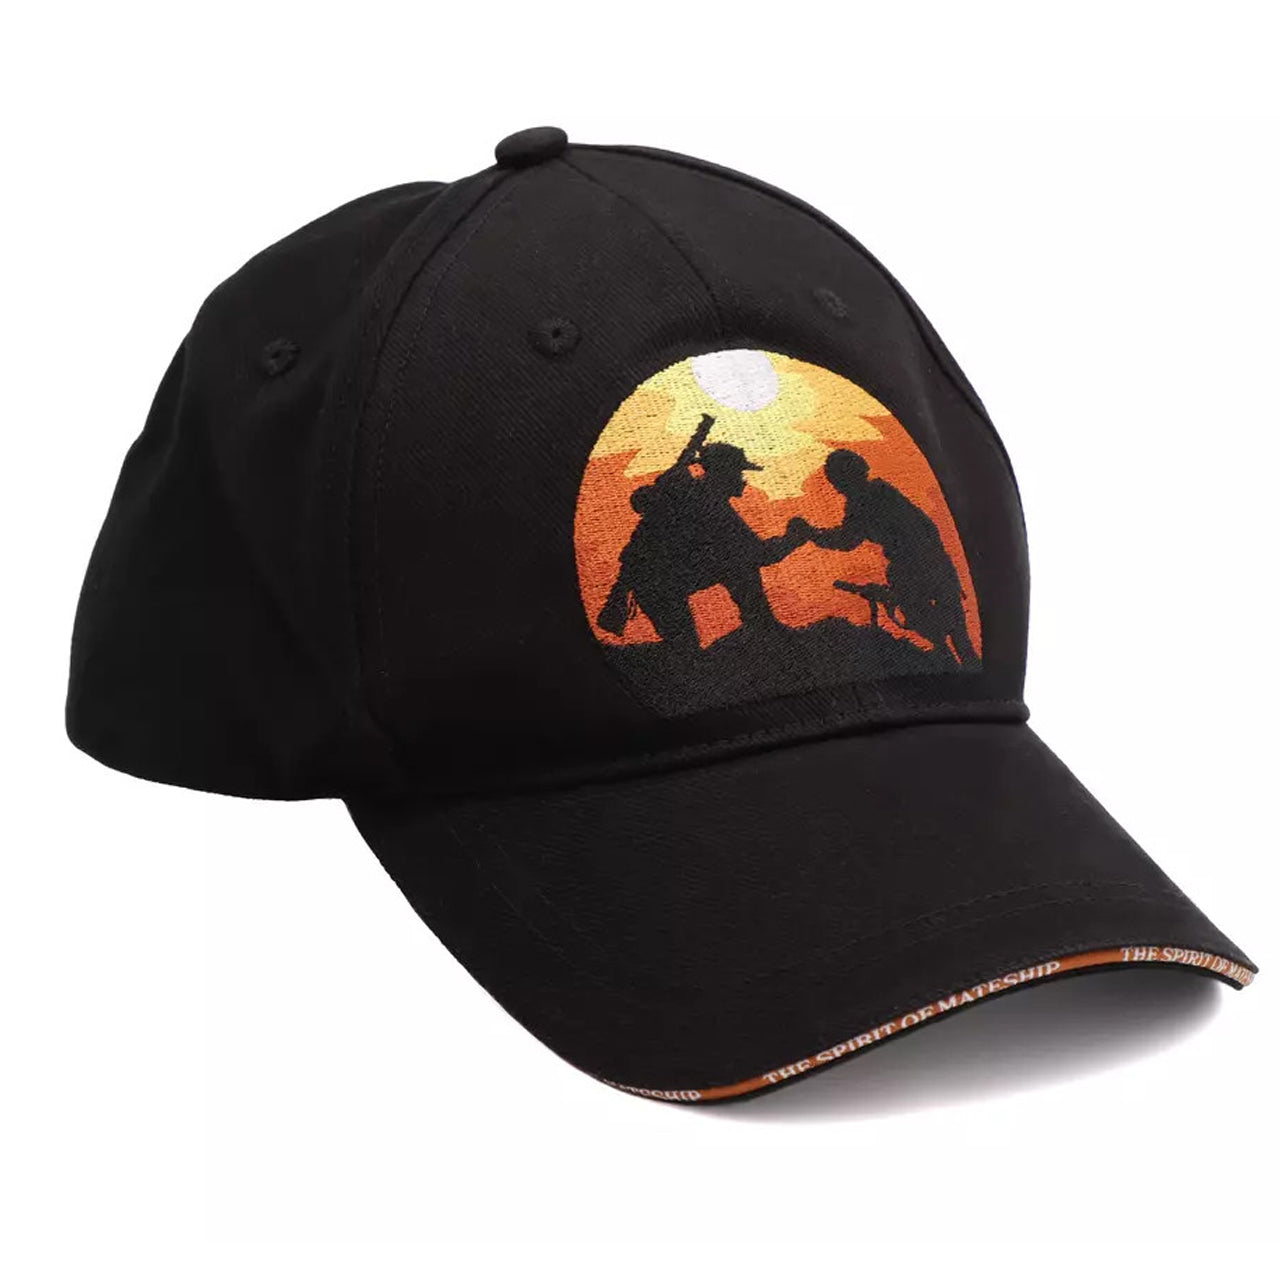 The "Spirit of Mateship Cap" is more than just an accessory; it's a symbol of unity, resilience, and the unbreakable bonds that define the Australian identity. Crafted with care, this cap features a sleek black design with a striking burnt orange sandwich peak. www.defenceqstore.com.au